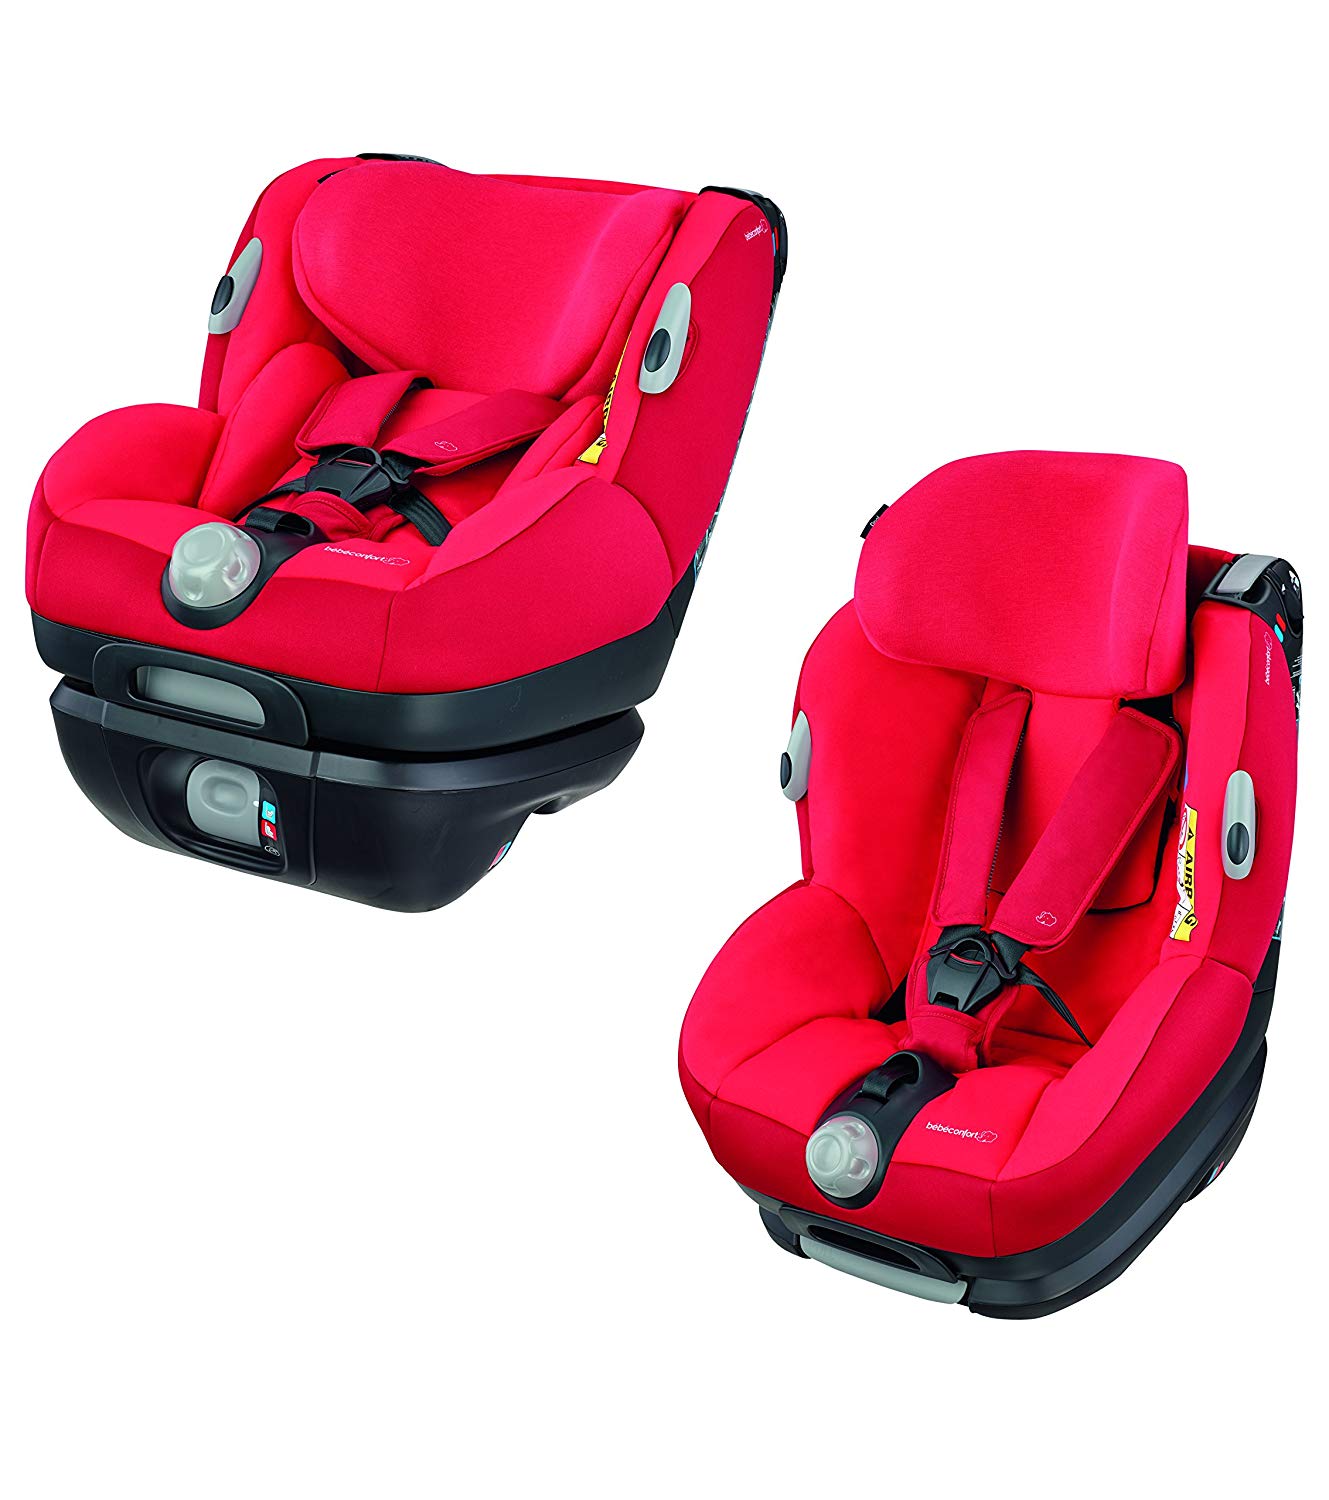 Bébé Confort Opal Booster Car Seat for Children Aged 0 to 4 Years, Vivid Red